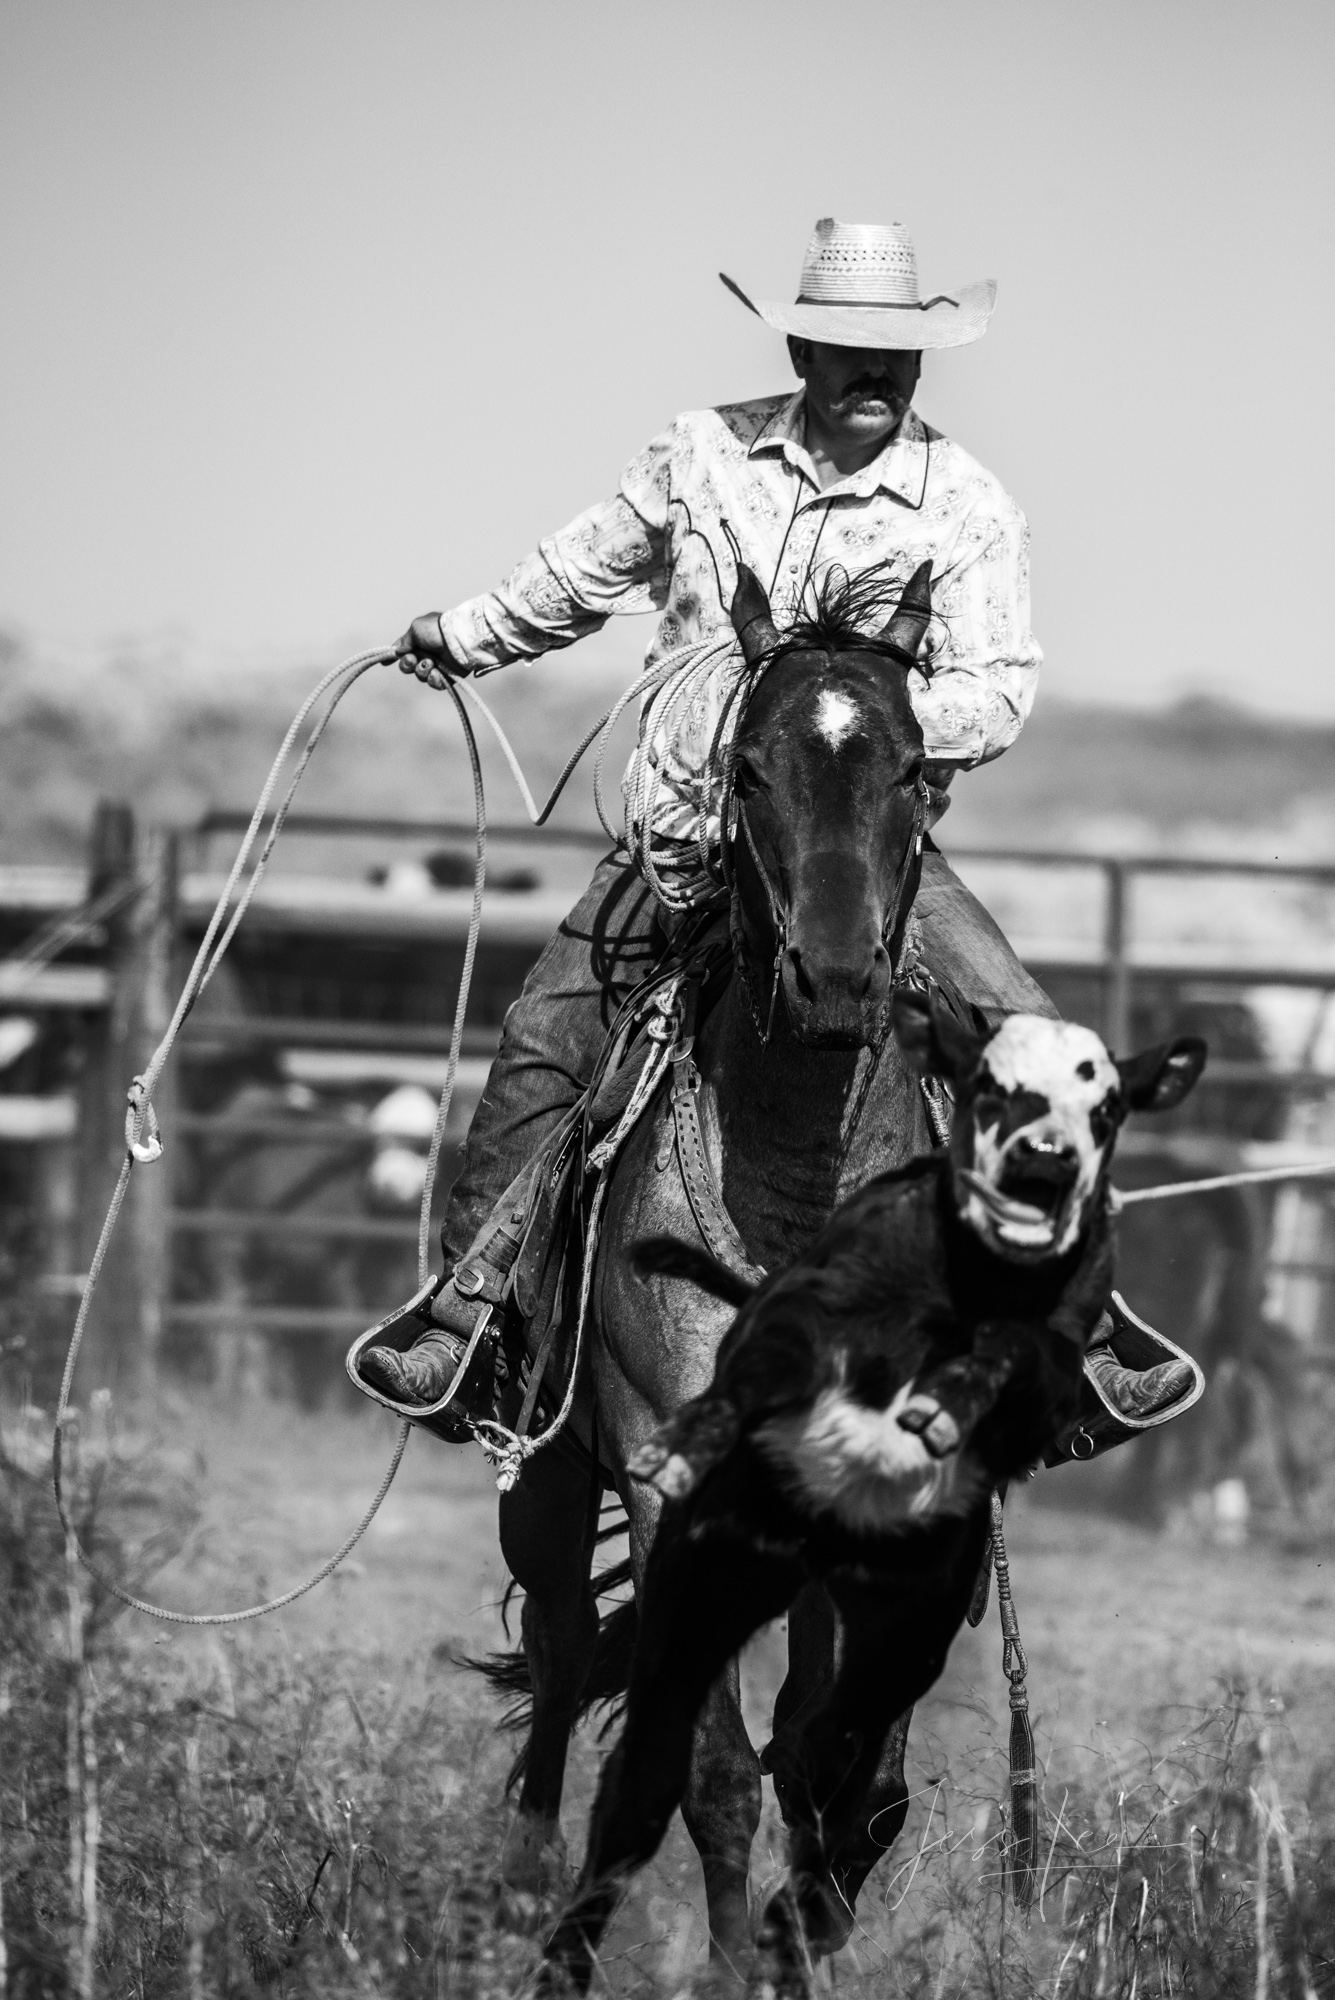 Fine Art Limited Edition Photo Prints of Cowboys, Horses, and life in the West. Tailler - Cowboy pictures in black and white....